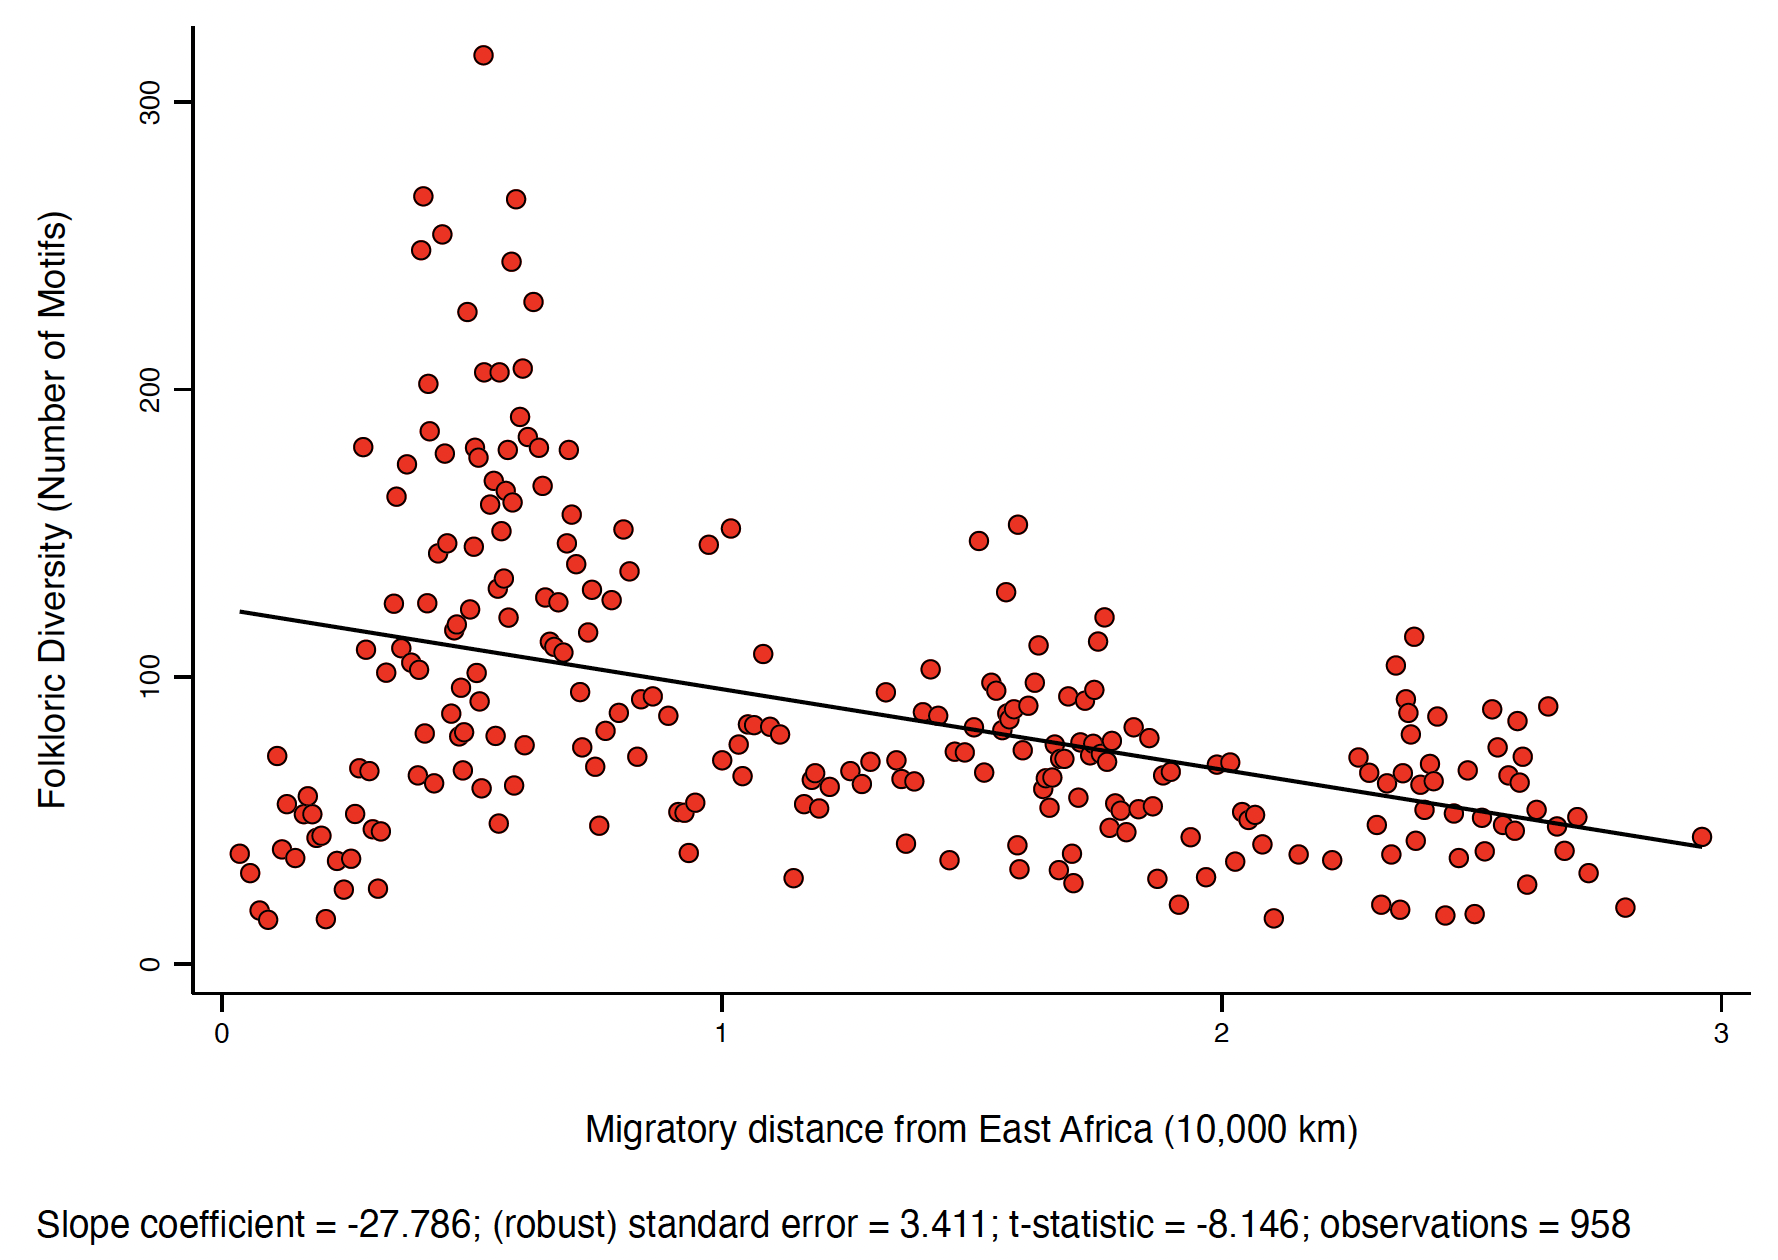 Figure 4 Number of motifs and migratory distance from Africa